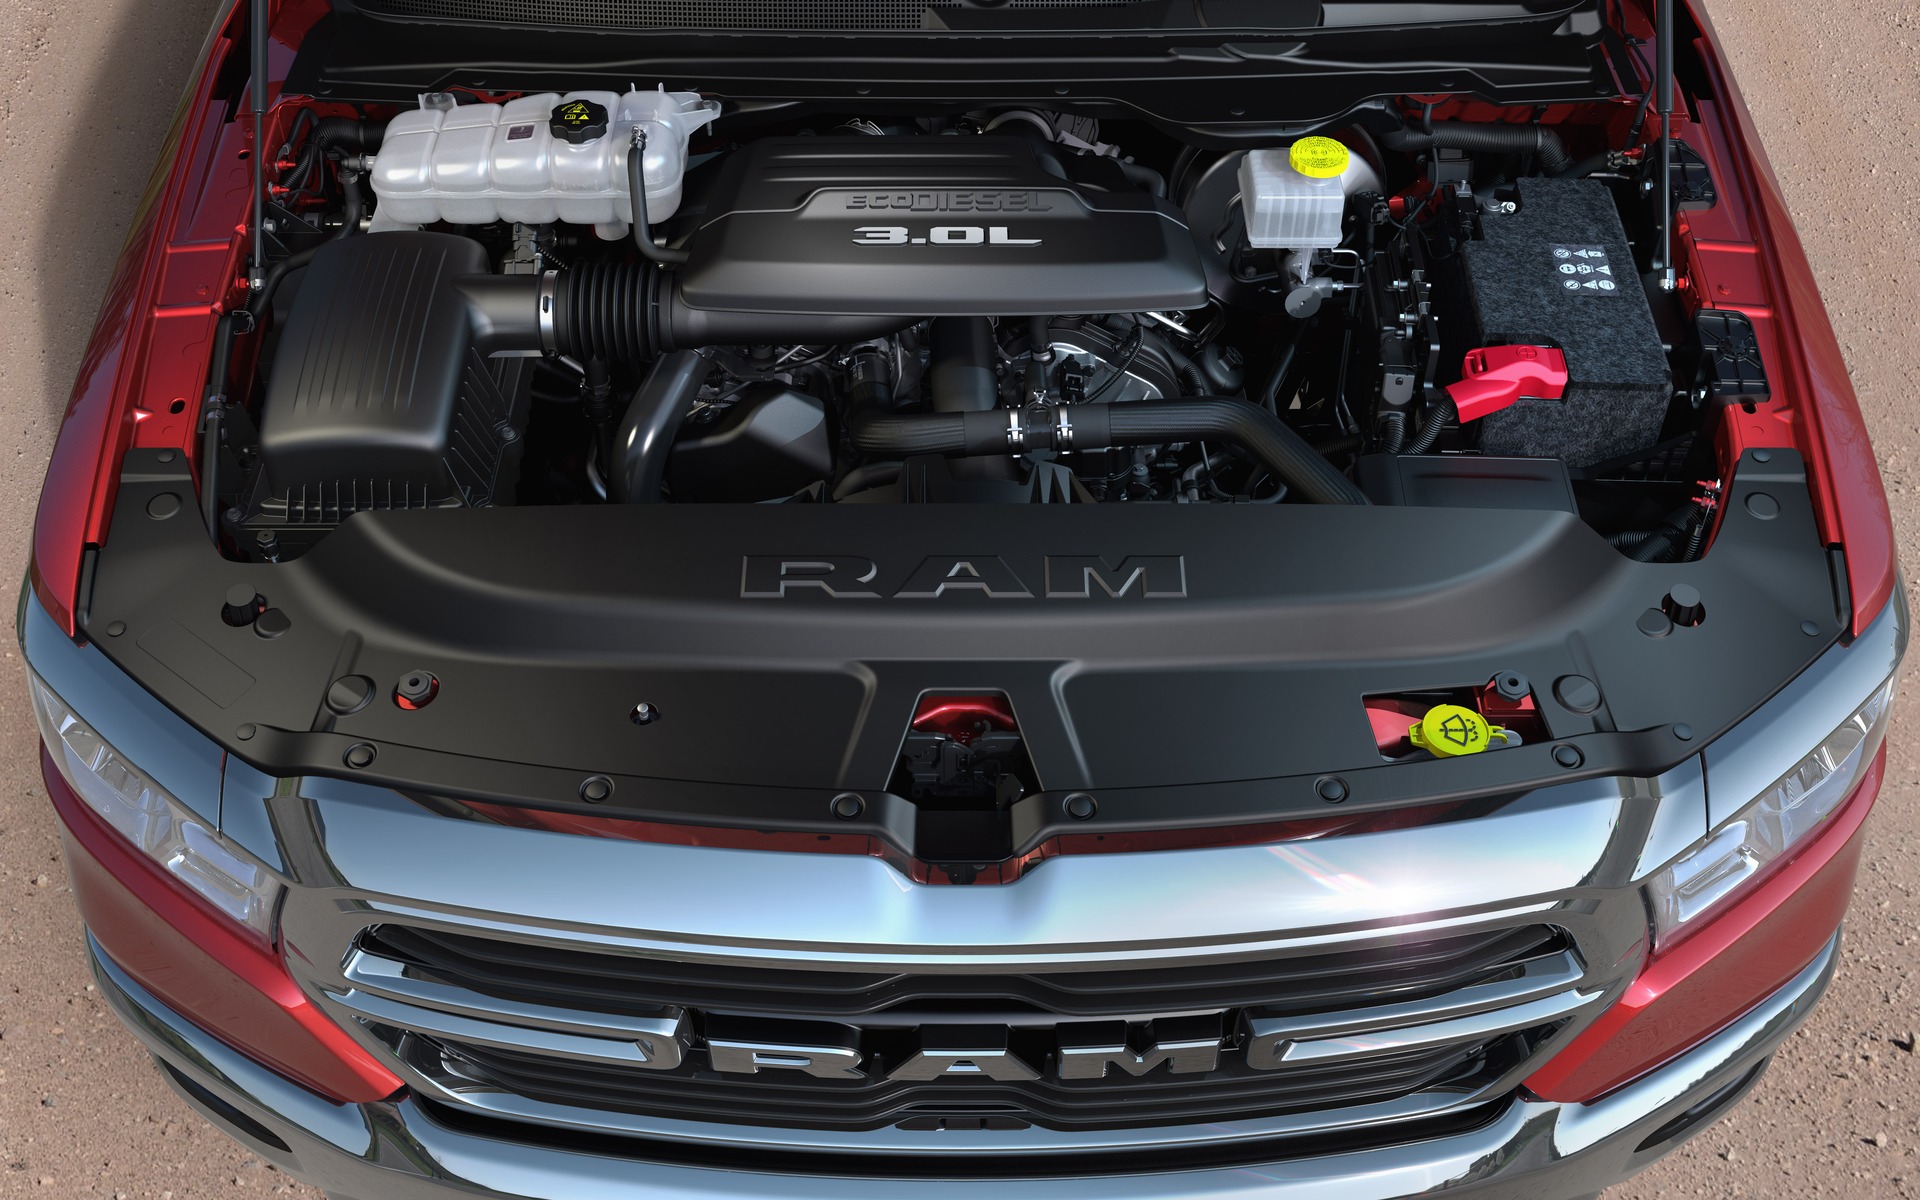 Comparing Engines When Buying a New Car